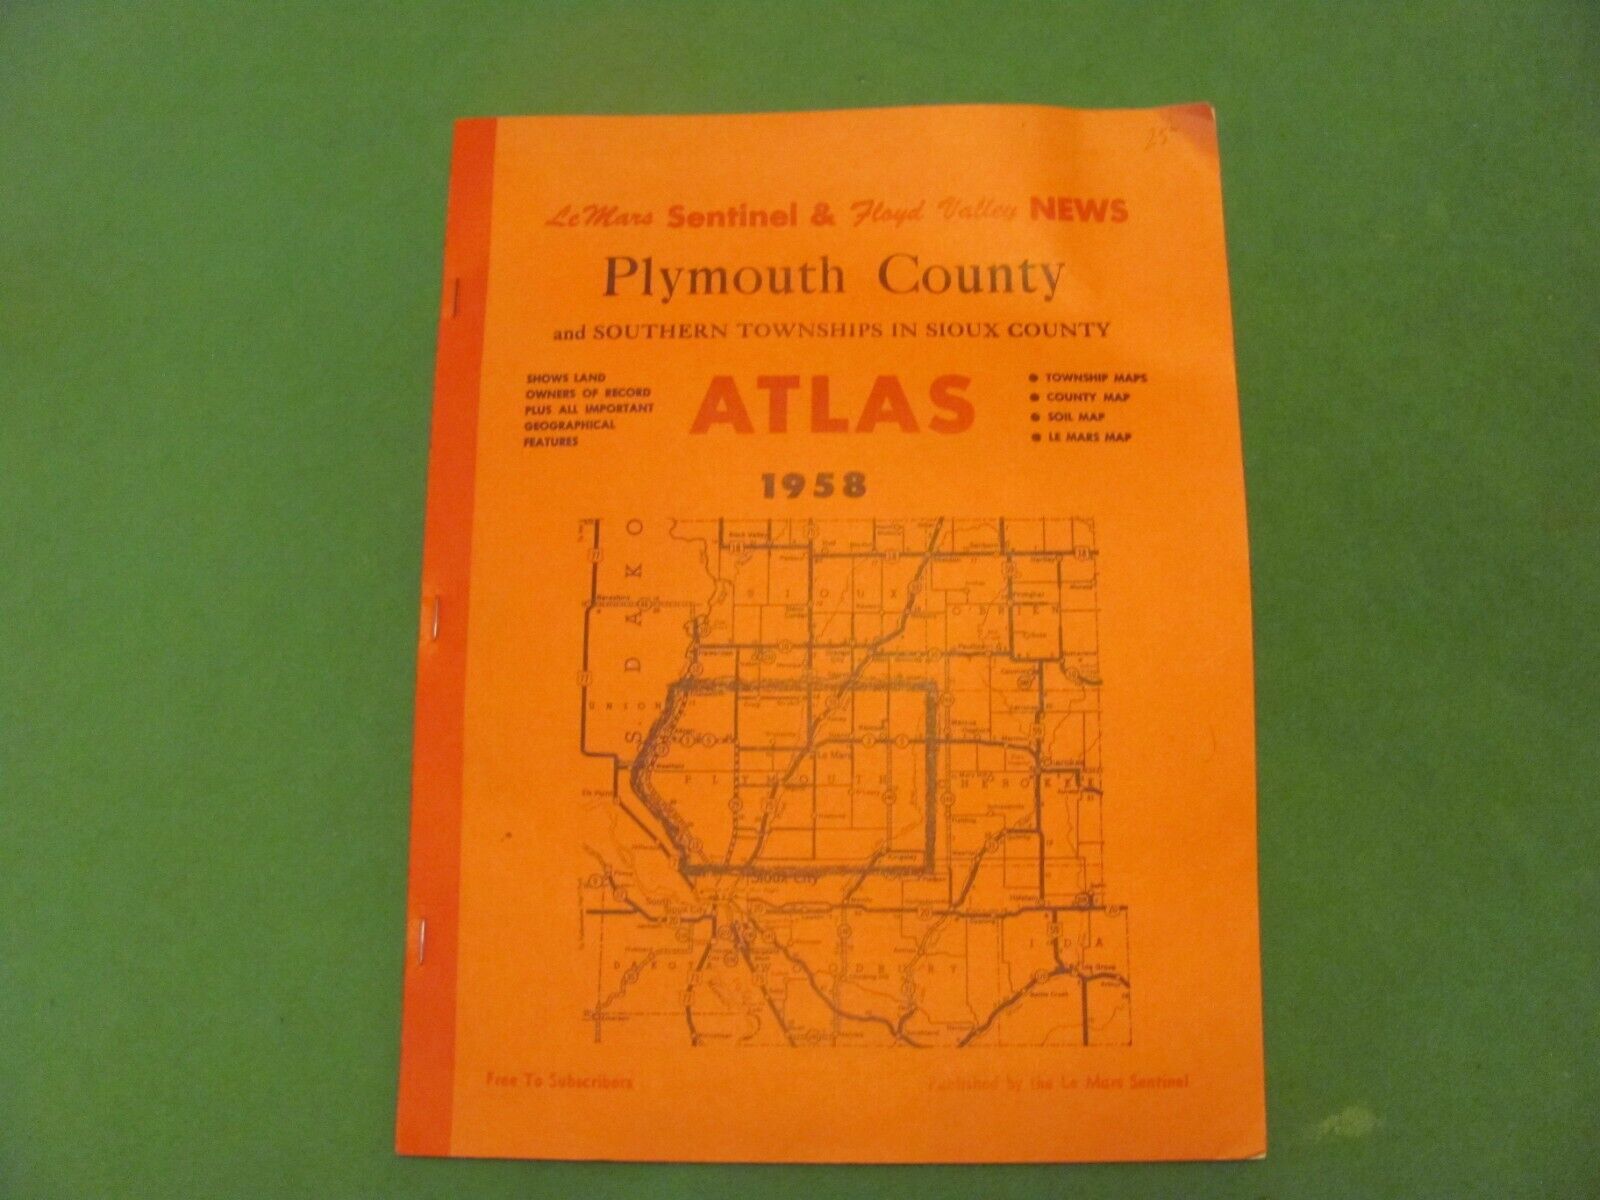 1958 Atlas Plymouth County & Southern Townships in Sioux County.